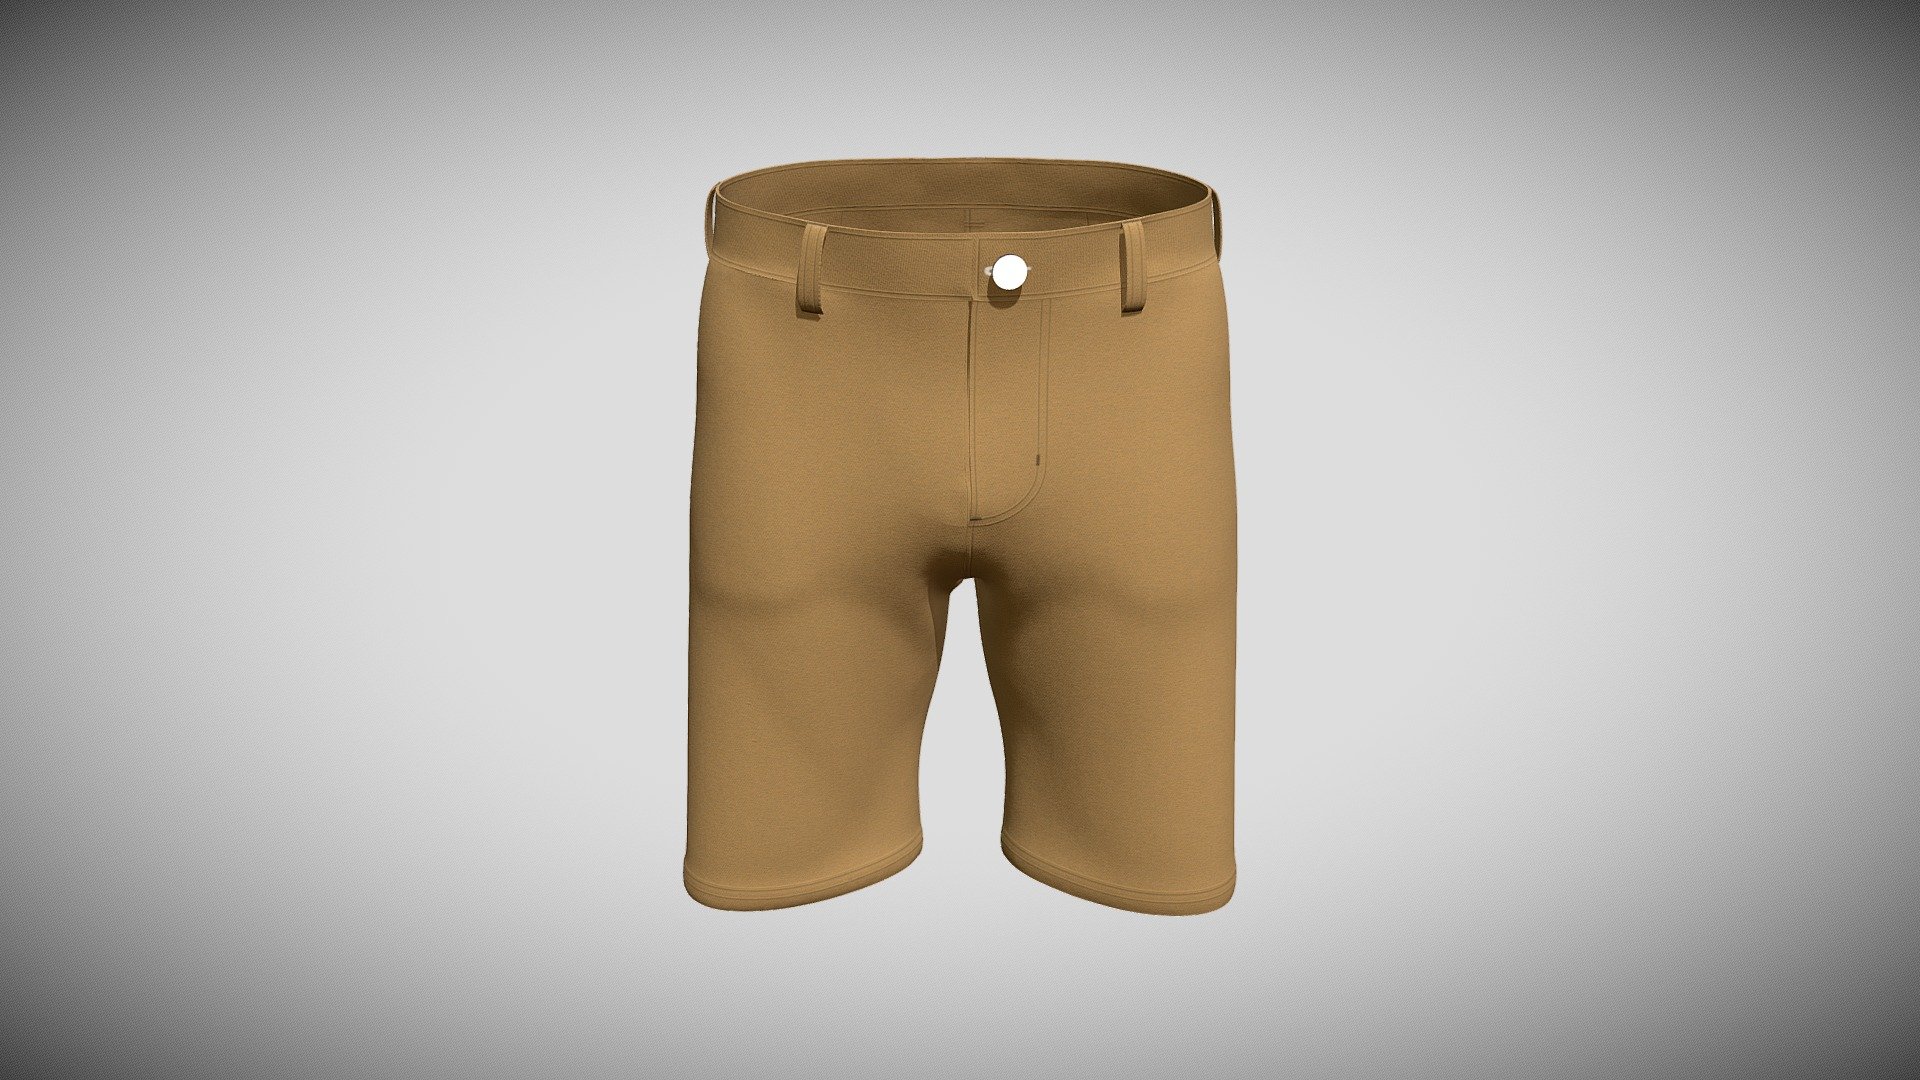 Cloth Title = Men Suit Short Pant 

SKU = DG100047 

Category = Men 

Product Type = Pant 

Cloth Length = Short  

Body Fit = Regular Fit 

Occasion = Casual  

Waist Rise = Mid Rise 


Our Services:

3D Apparel Design.

OBJ,FBX,GLTF Making with High/Low Poly.

Fabric Digitalization.

Mockup making.

3D Teck Pack.

Pattern Making.

2D Illustration.

Cloth Animation and 360 Spin Video.


Contact us:- 

Email: info@digitalfashionwear.com 

Website: https://digitalfashionwear.com 

WhatsApp No: +8801759350445 


We designed all the types of cloth specially focused on product visualization, e-commerce, fitting, and production. 

We will design: 

T-shirts 

Polo shirts 

Hoodies 

Sweatshirt 

Jackets 

Shirts 

TankTops 

Trousers 

Bras 

Underwear 

Blazer 

Aprons 

Leggings 

and All Fashion items. 





Our goal is to make sure what we provide you, meets your demand 3d model